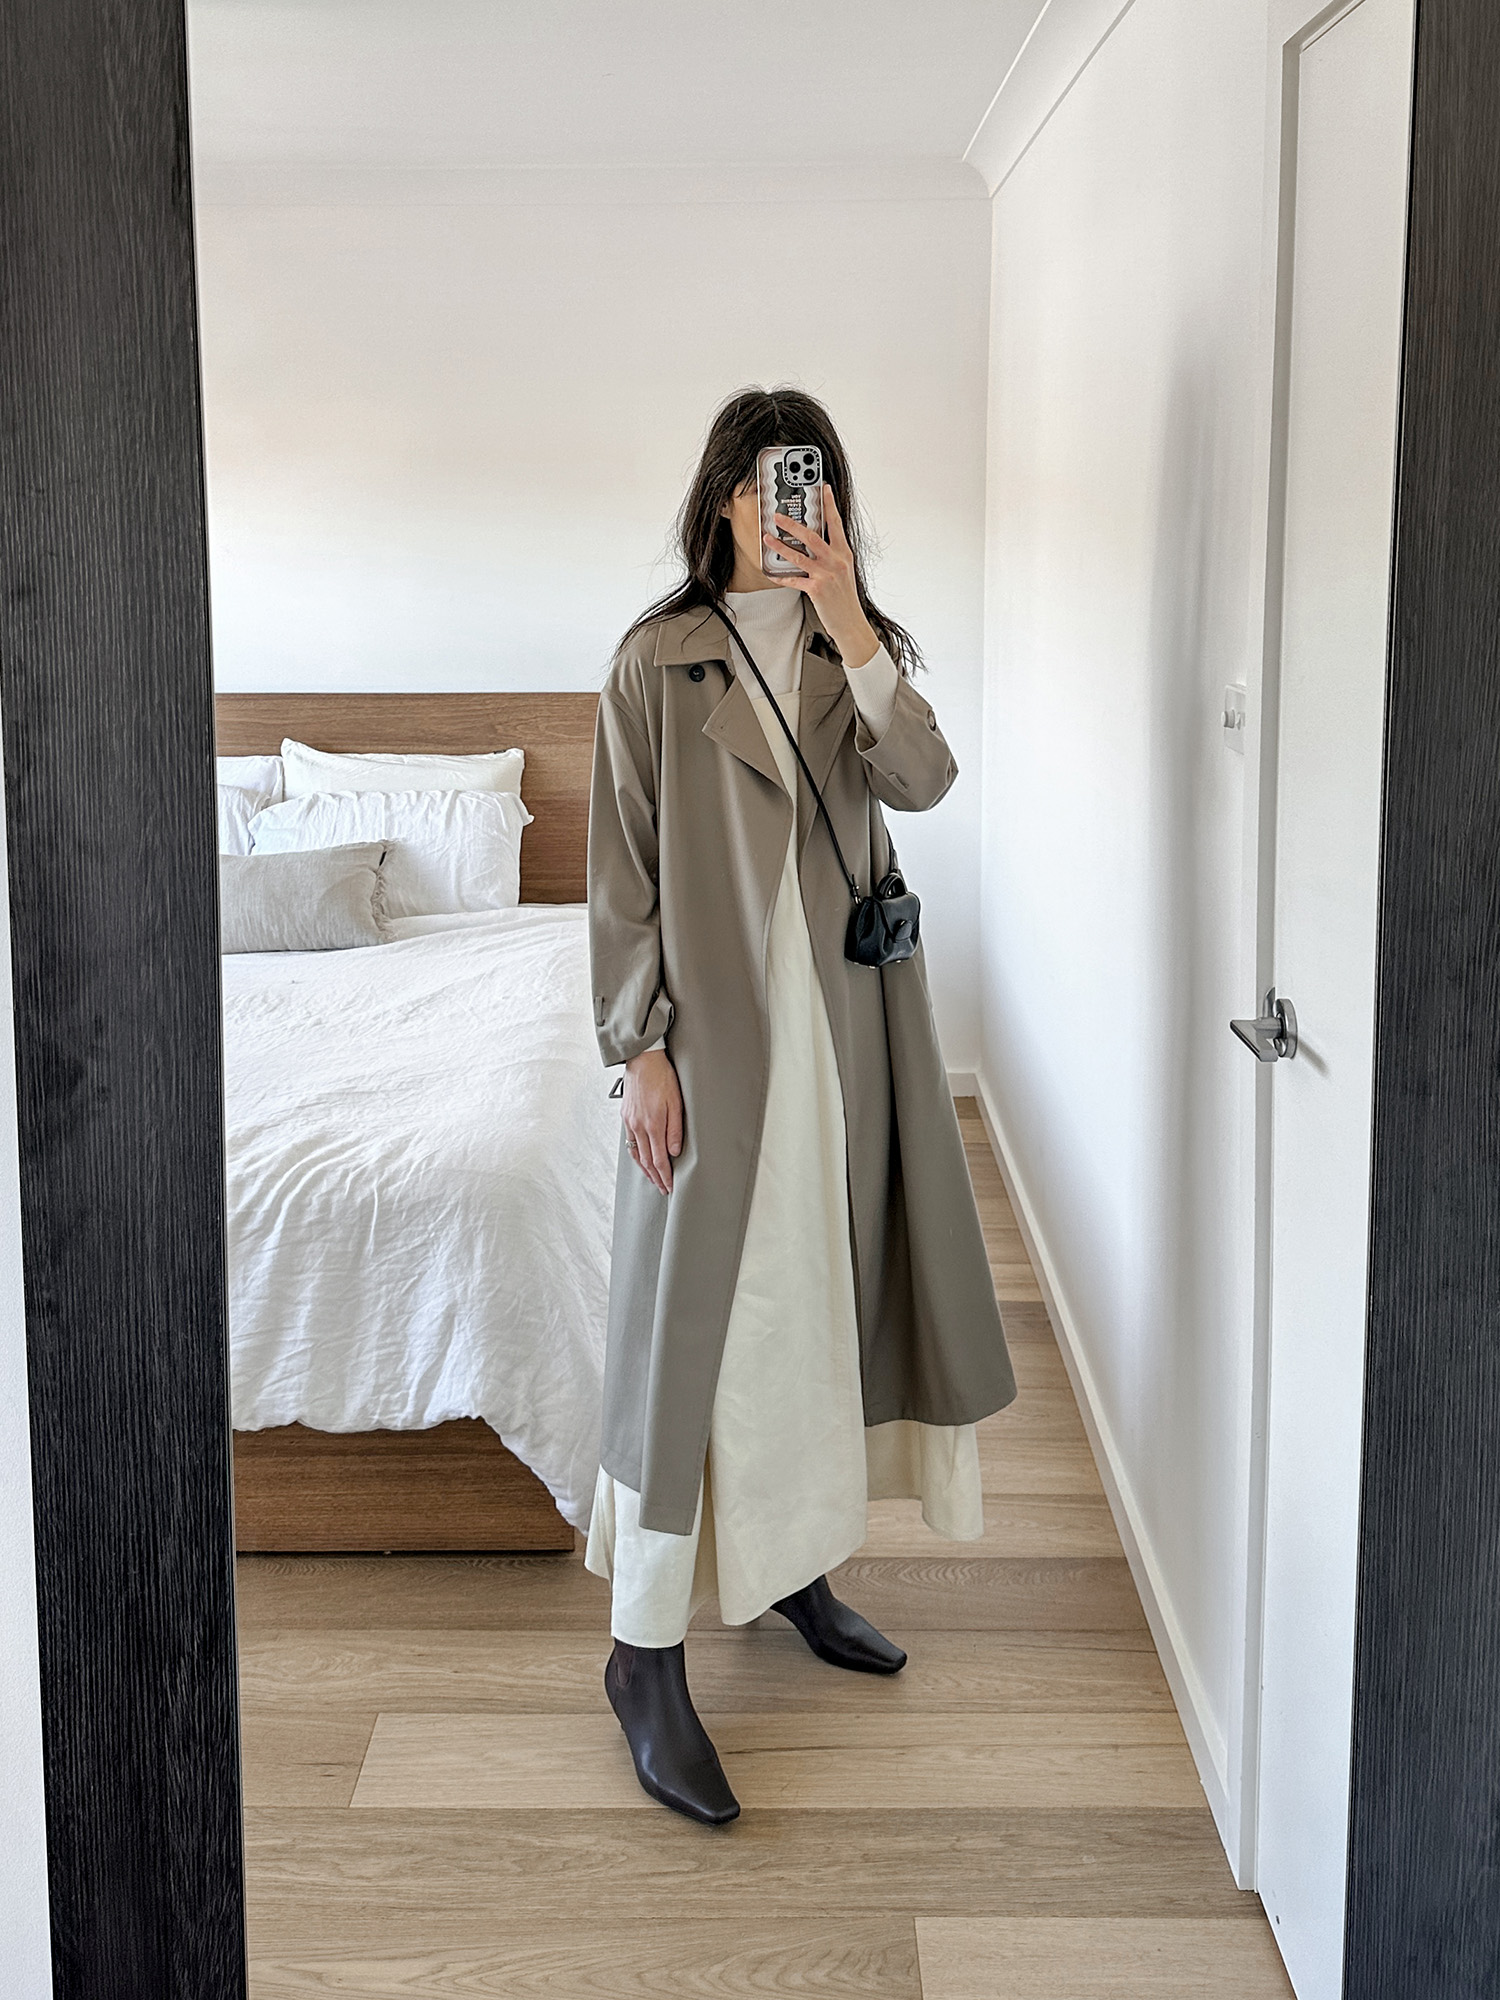 Goelia knit top and trench discount code with Lee Mathews Cassidy dress